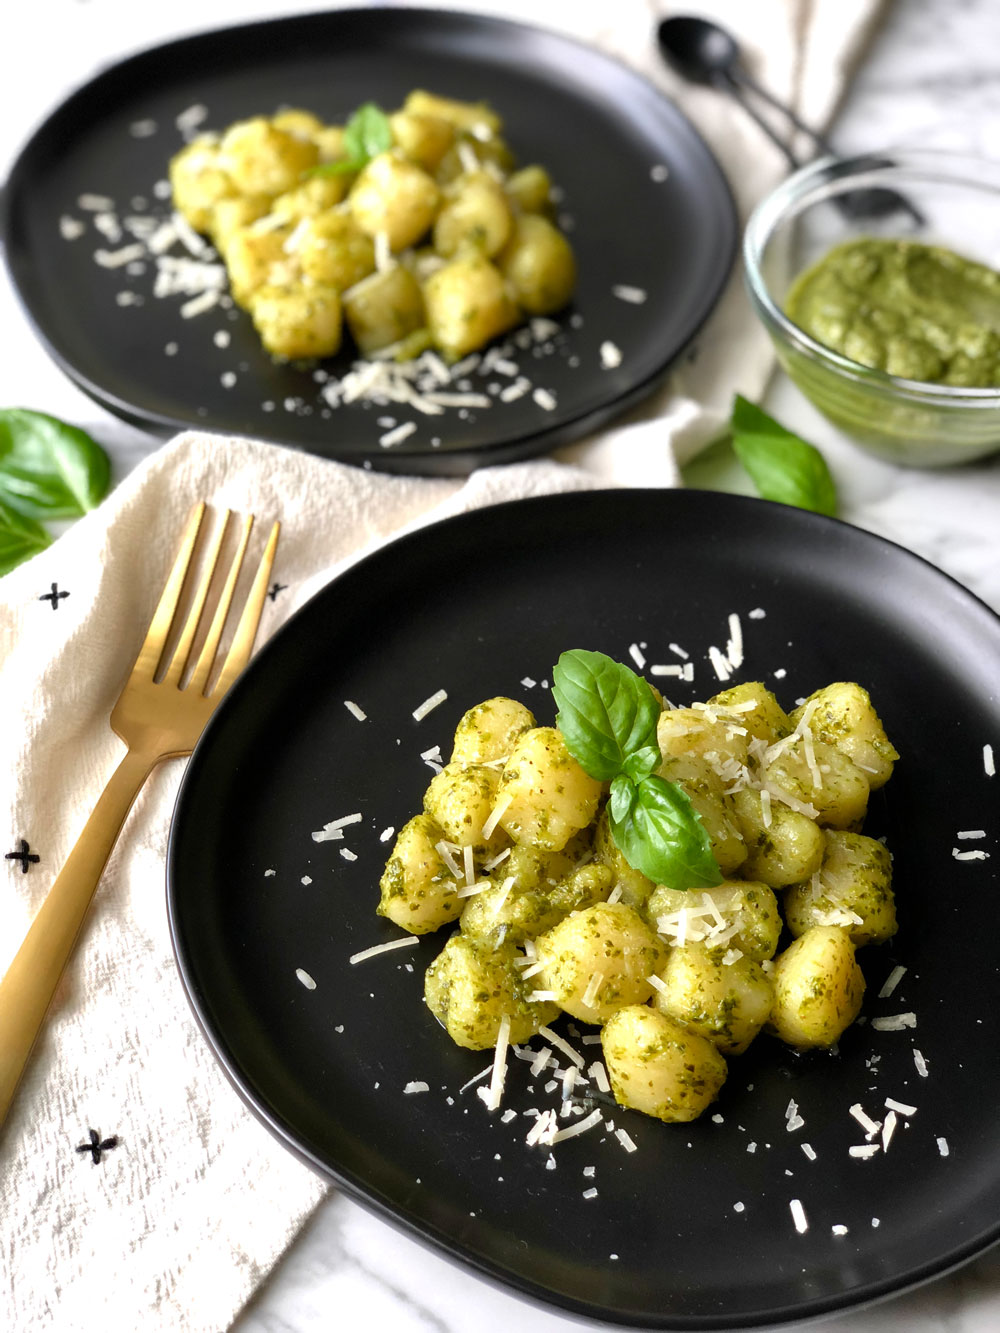 Cauliflower Gnocchi With Pesto Sauce Healthy With Nedihealthy With Nedi,How To Make Thai Tea From Scratch